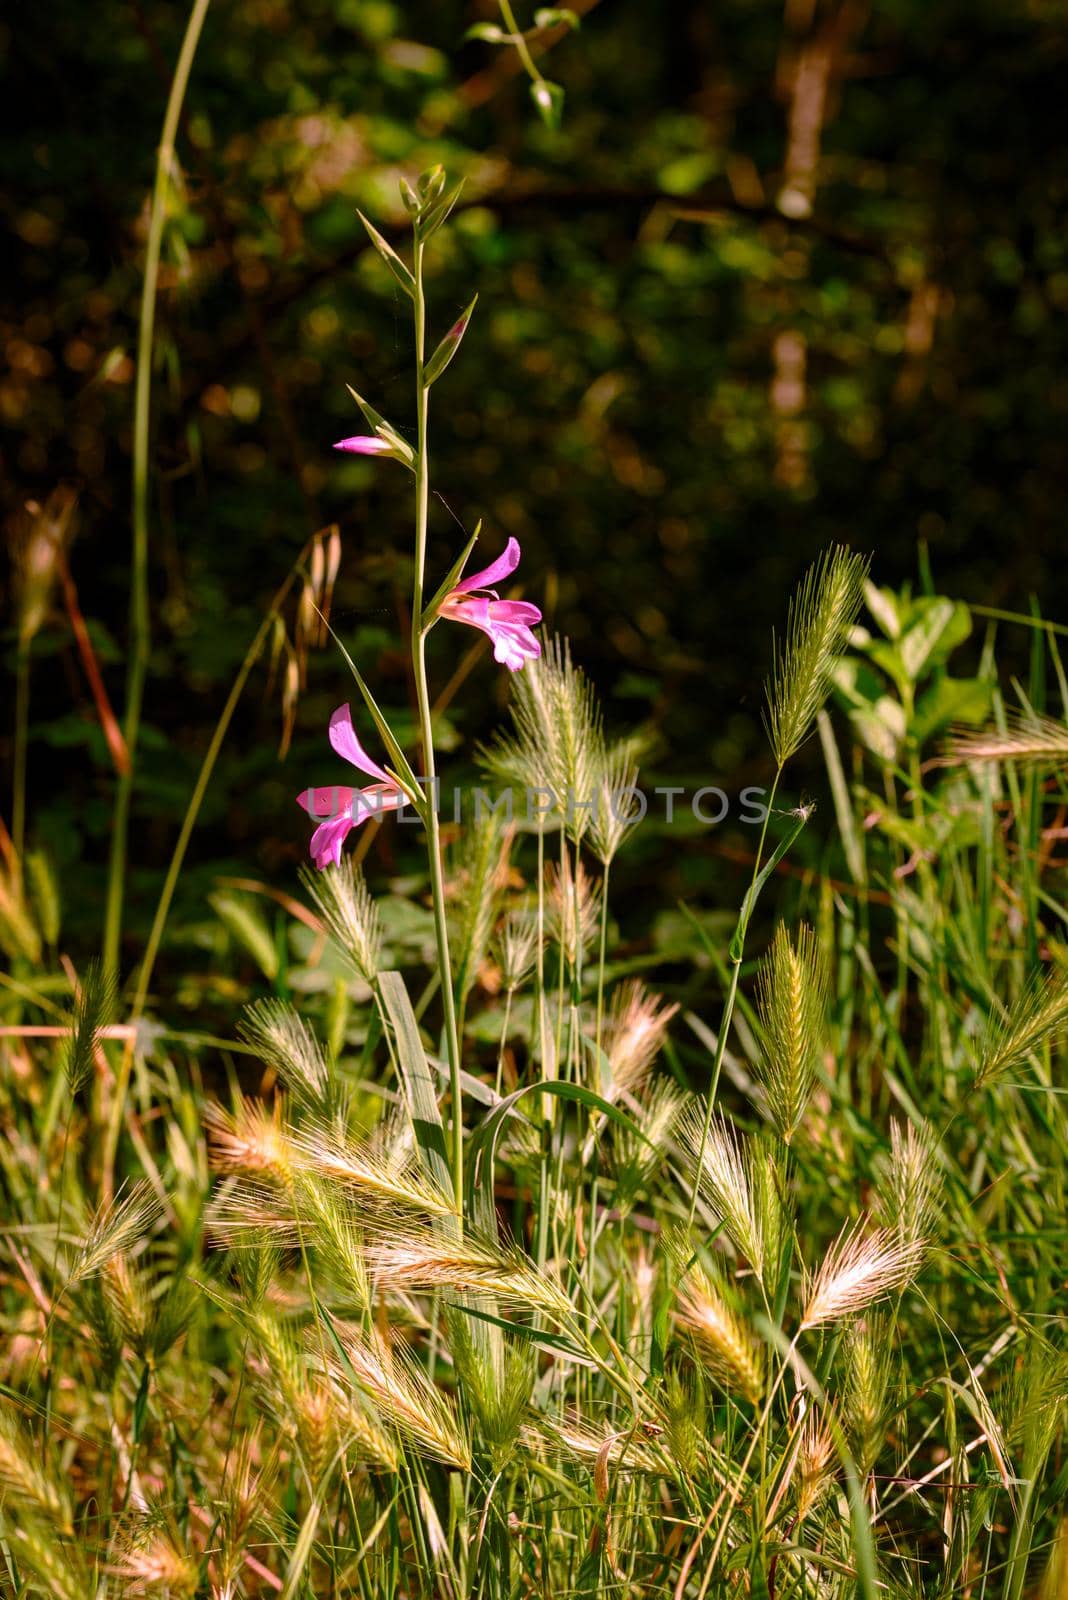 Gladiolus Italicus, also known as Italian gladiolus, field gladiolus, and common sword-lily, growing on the hills of the Marche region of Italy